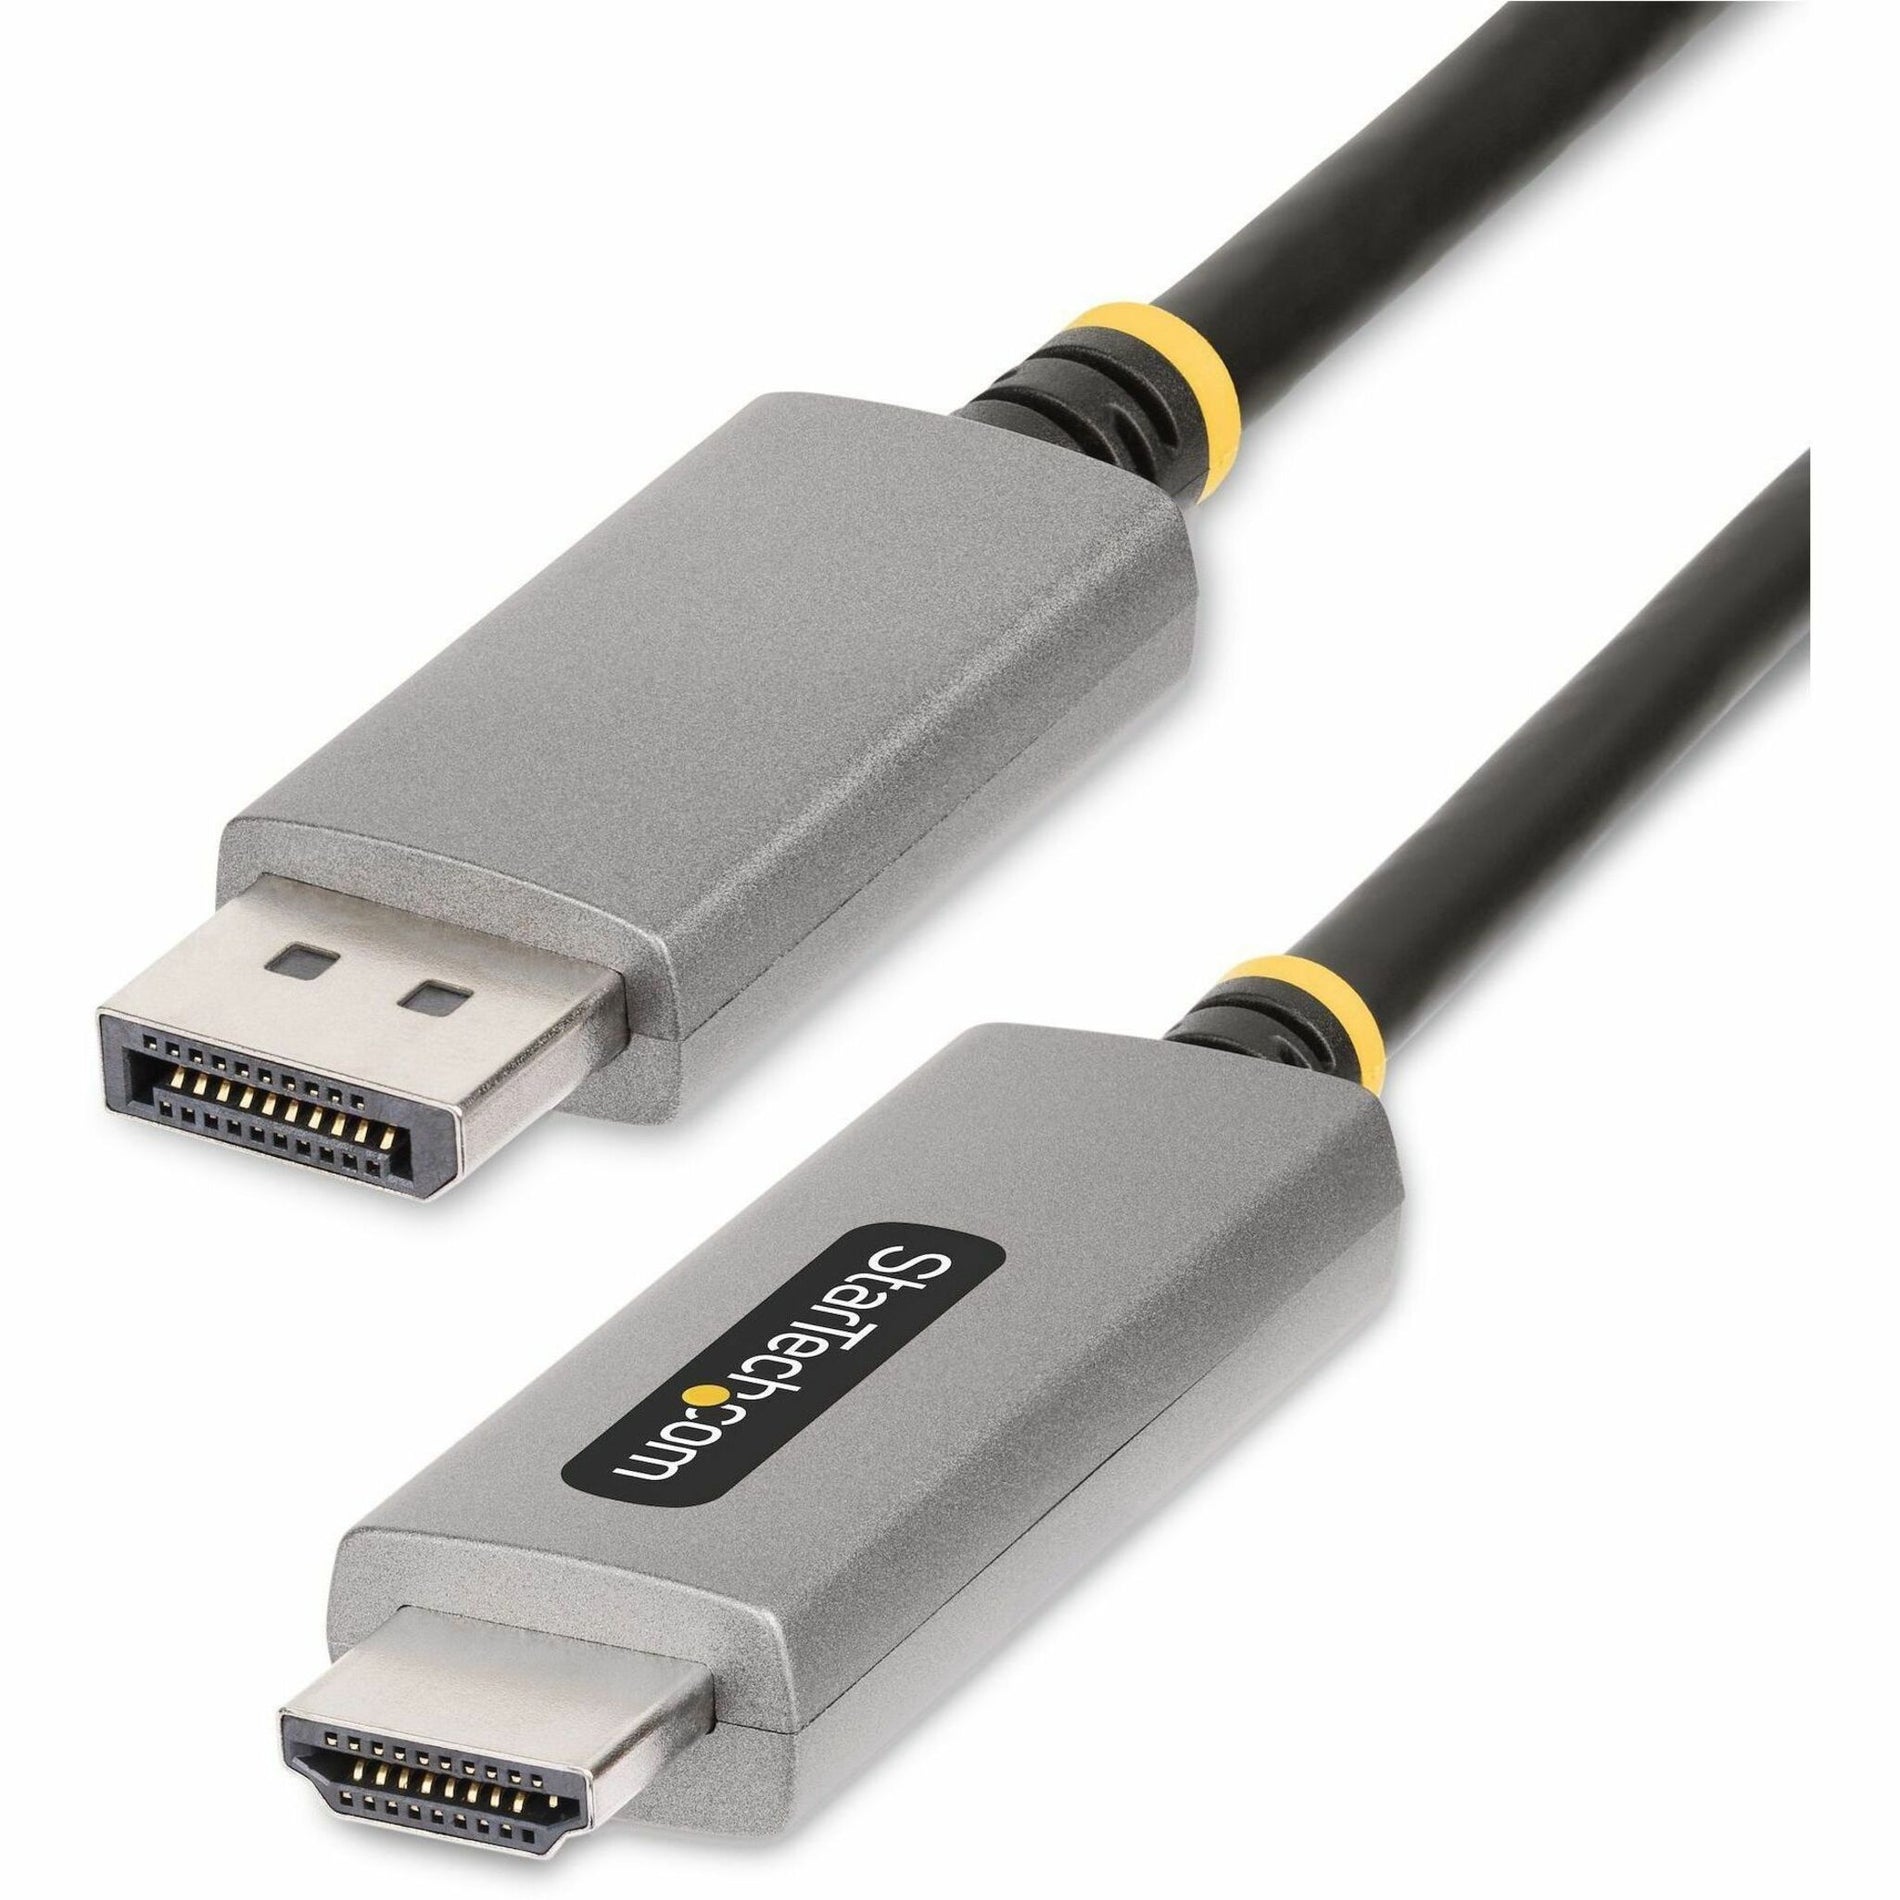 StarTech.com 133DISPLAYPORTHDMI21 DisplayPort/HDMI Audio/Video Cable, 6 ft, 7680 x 4320, HDR Support